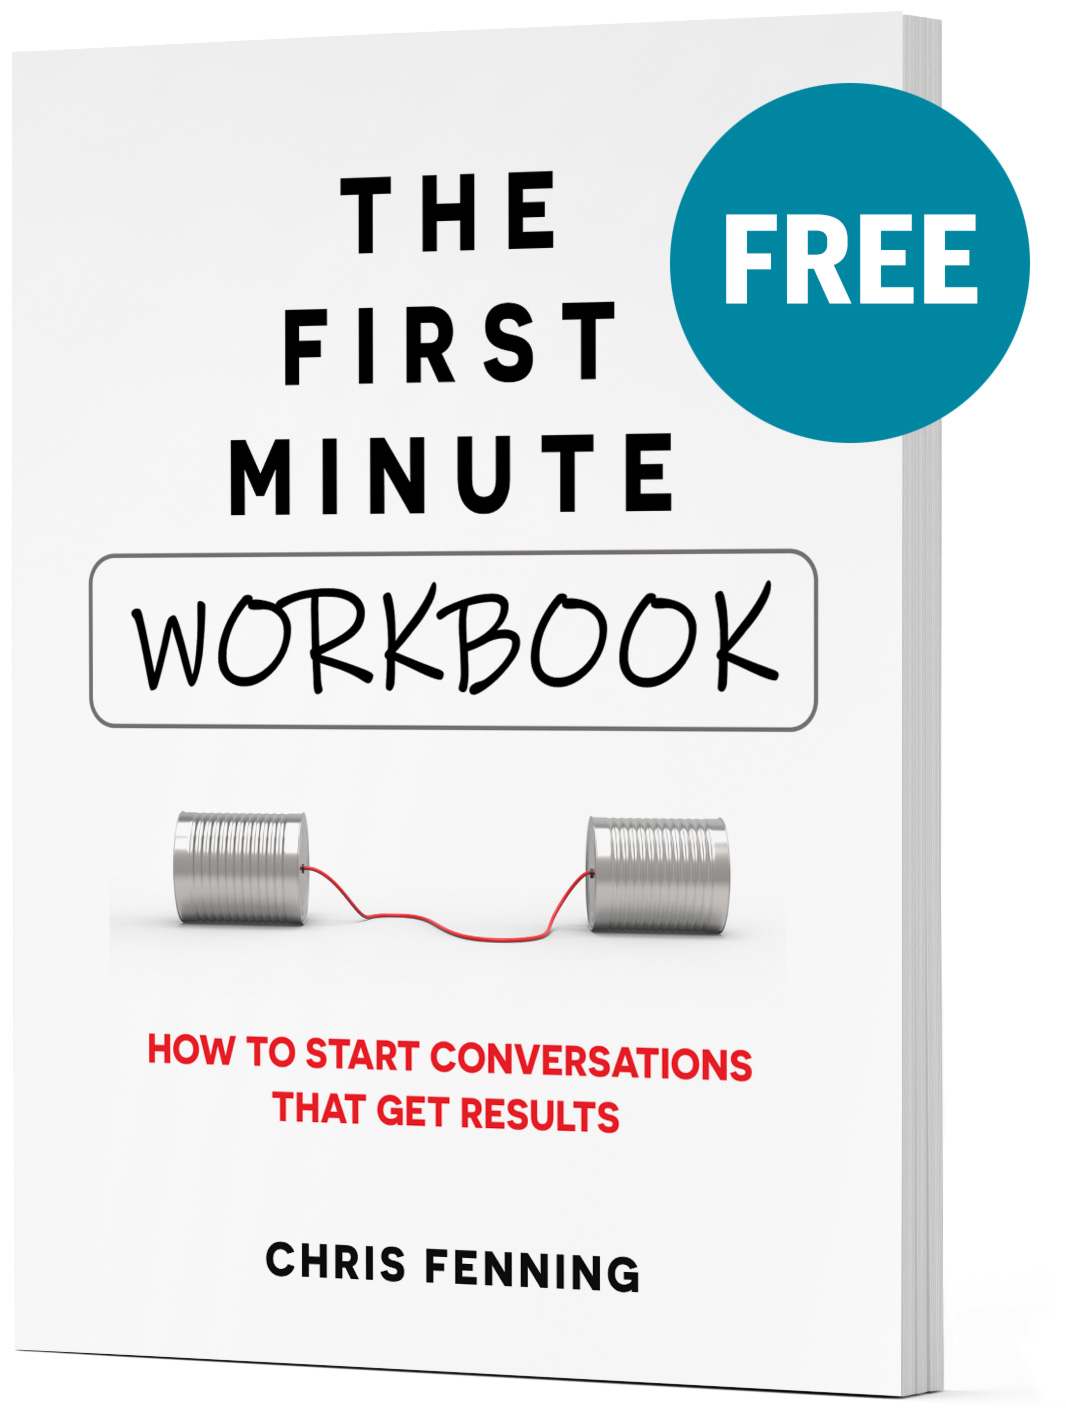 The First Minute Workbook by Chris Fenning